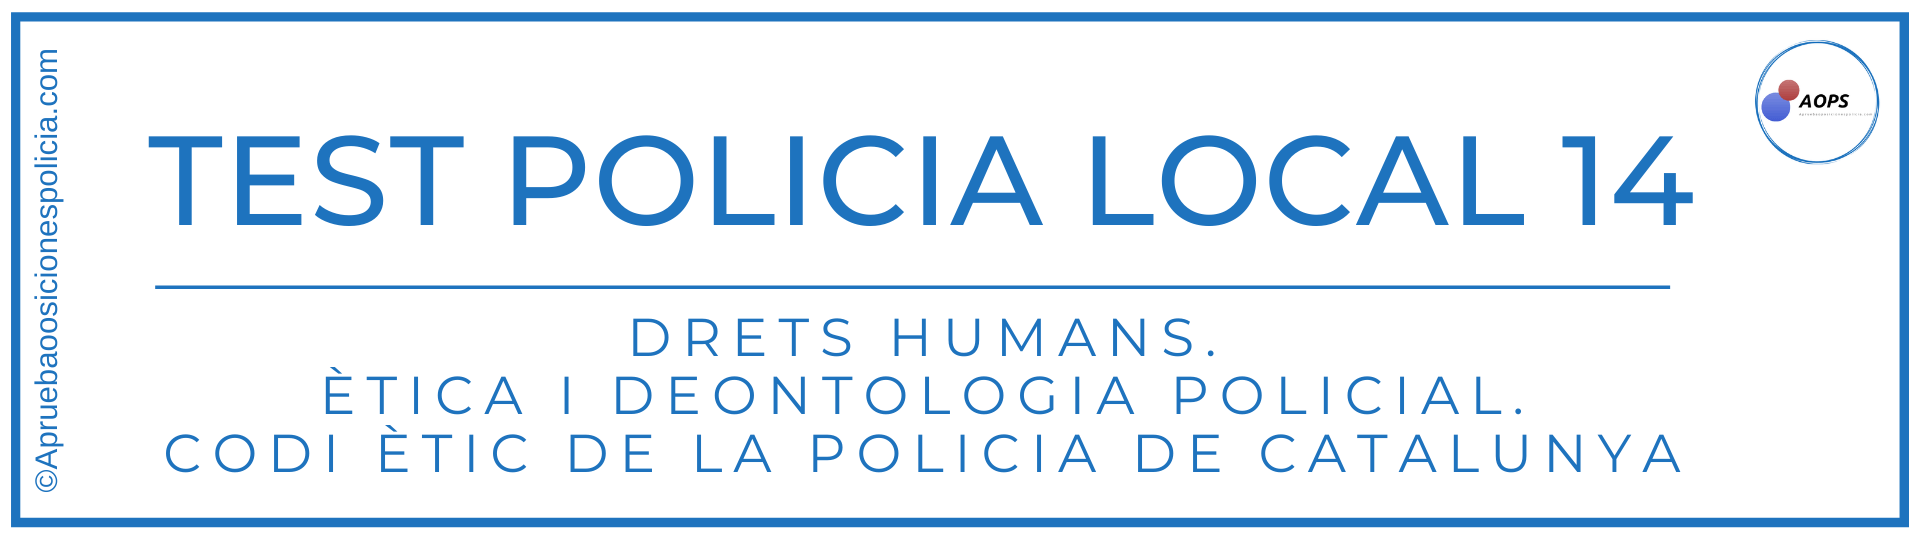 Test 14 deontologia policial